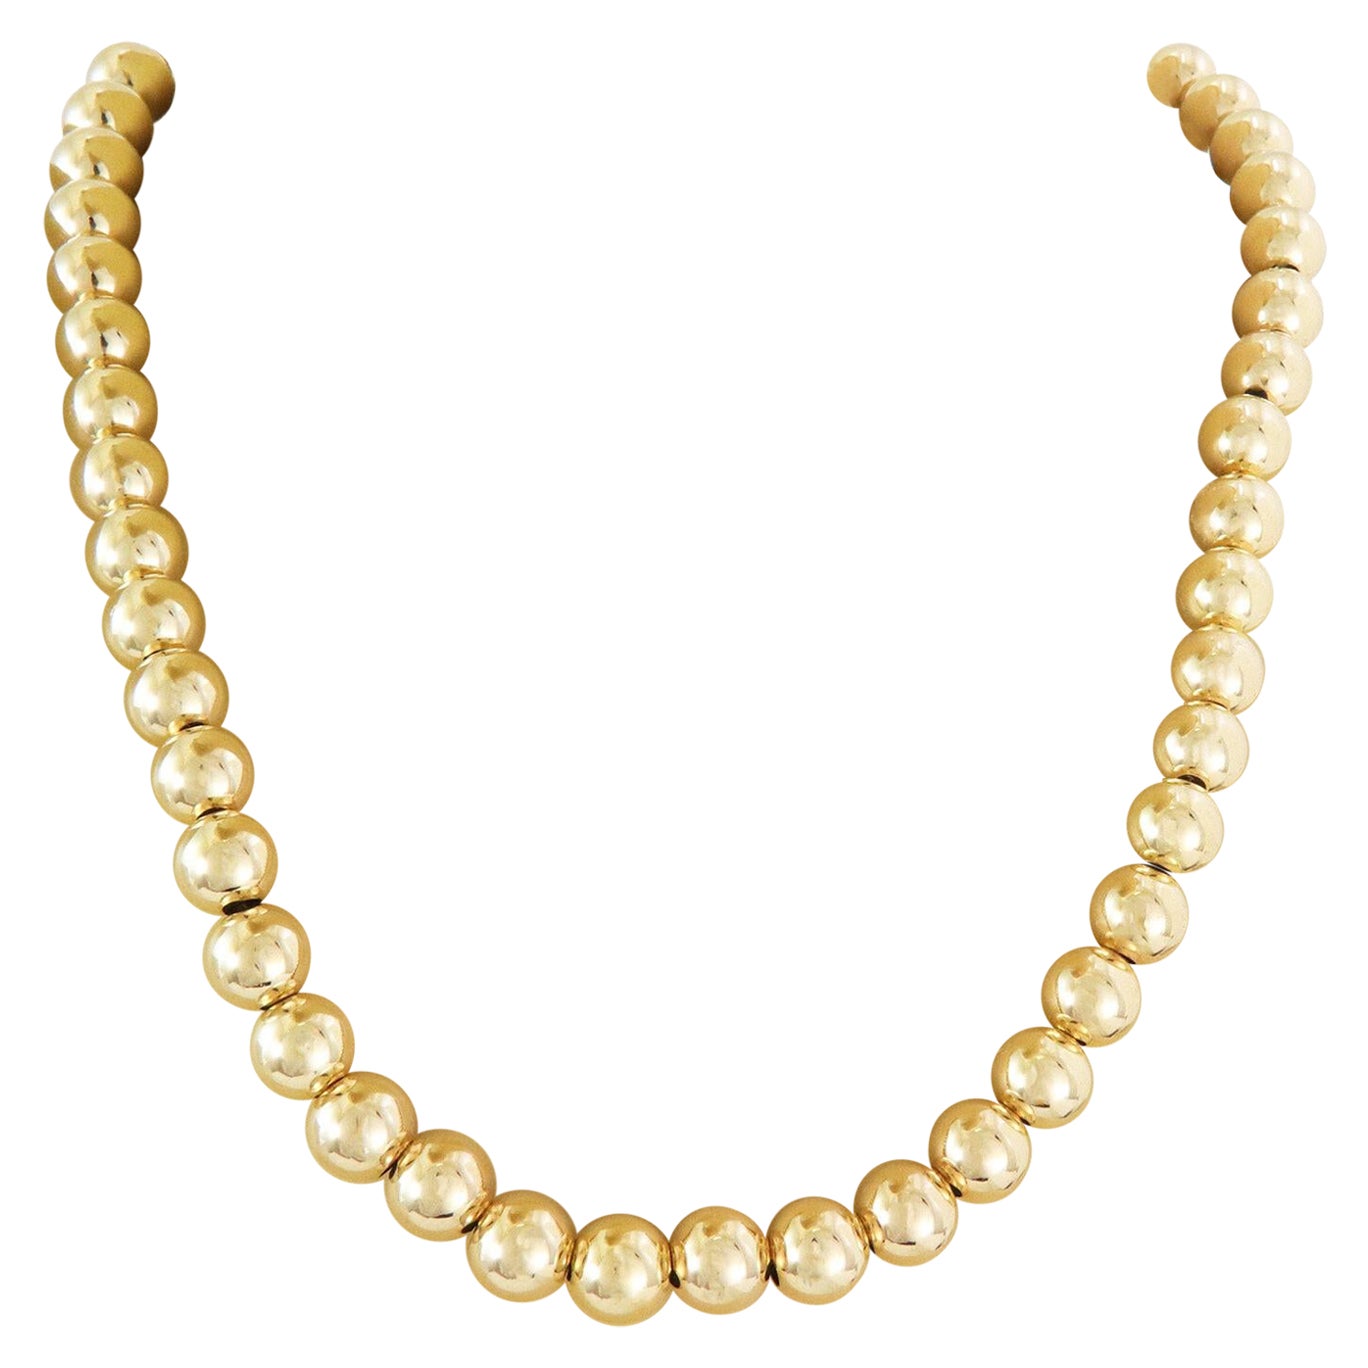 Vintage 14k Yellow Gold 9mm Beaded Necklace For Sale